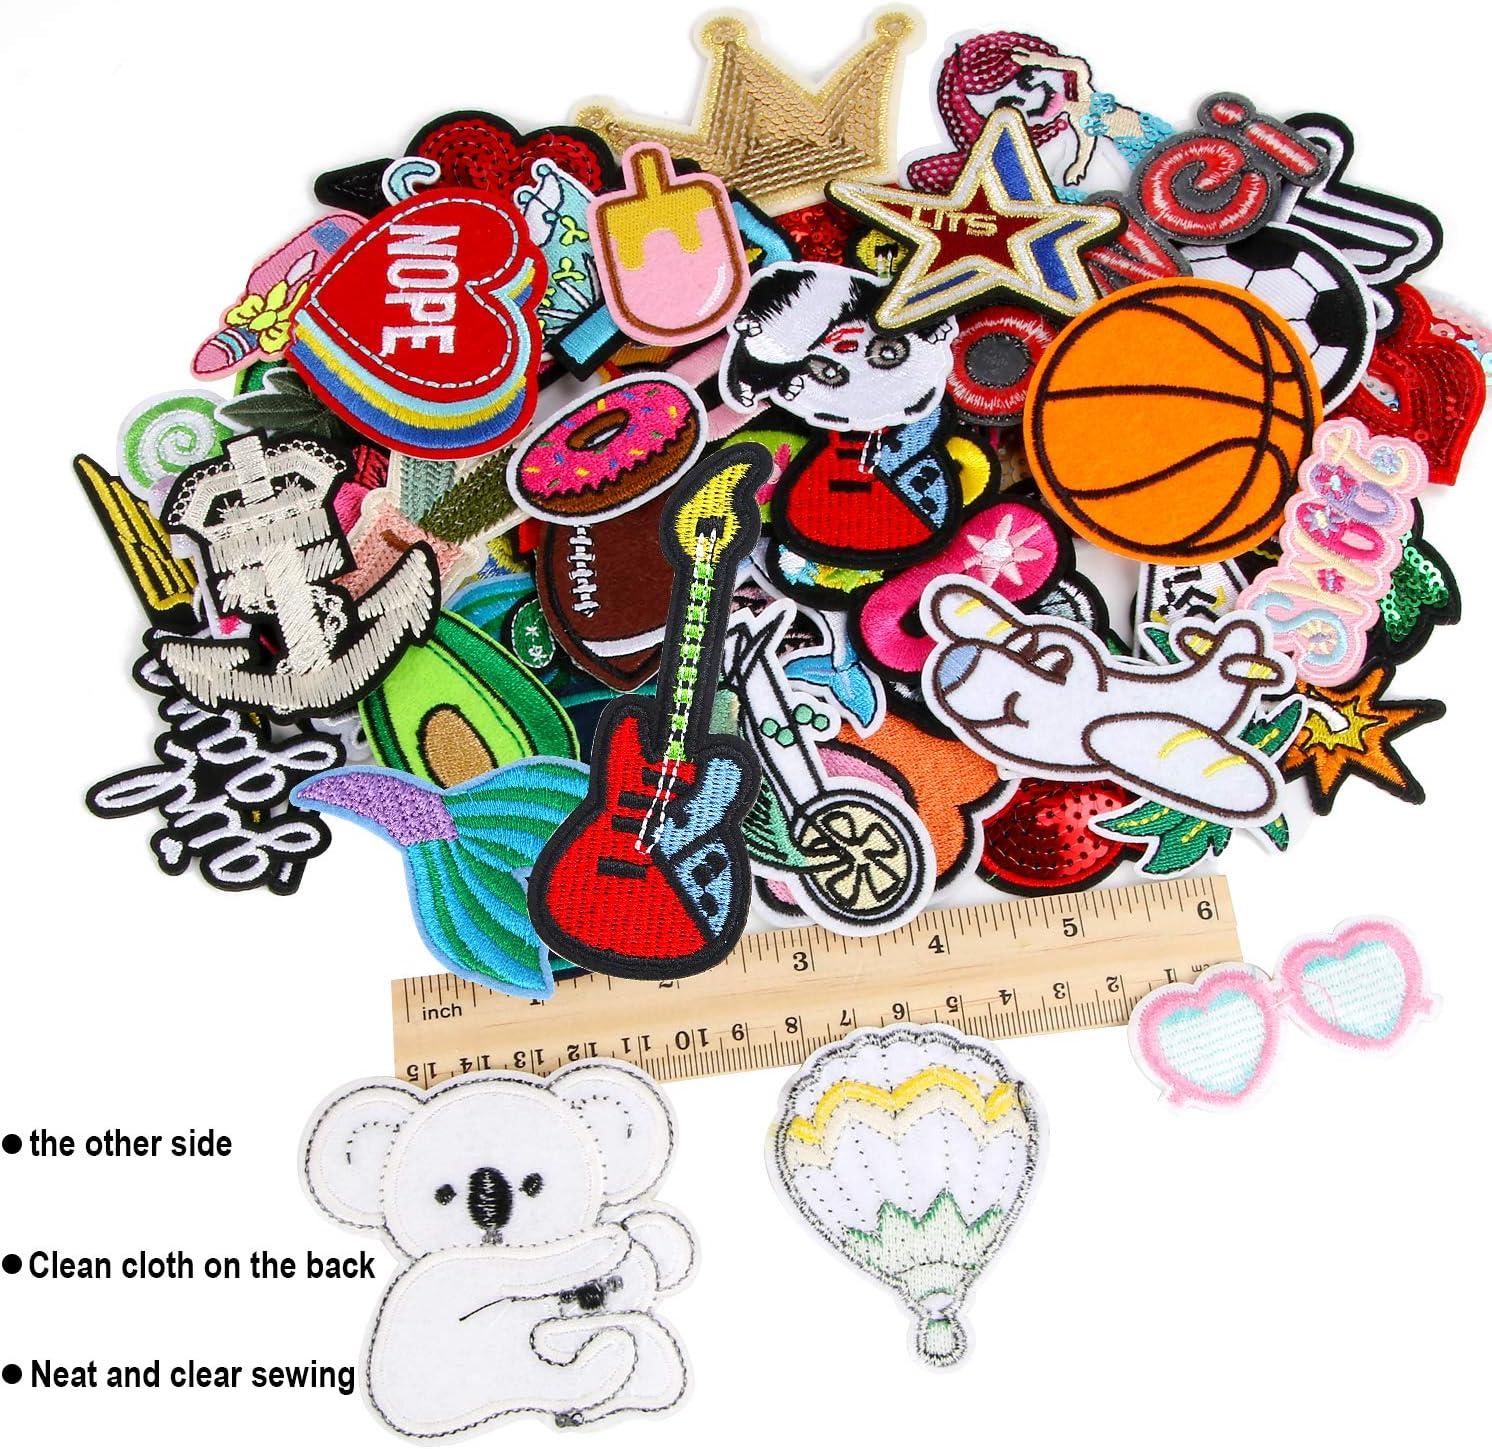 Patches 4 Pcs - Embroidered Patches Motif Applique Decoration Sew on  Patches for Jackets, Backpacks, Jeans, Clothes 